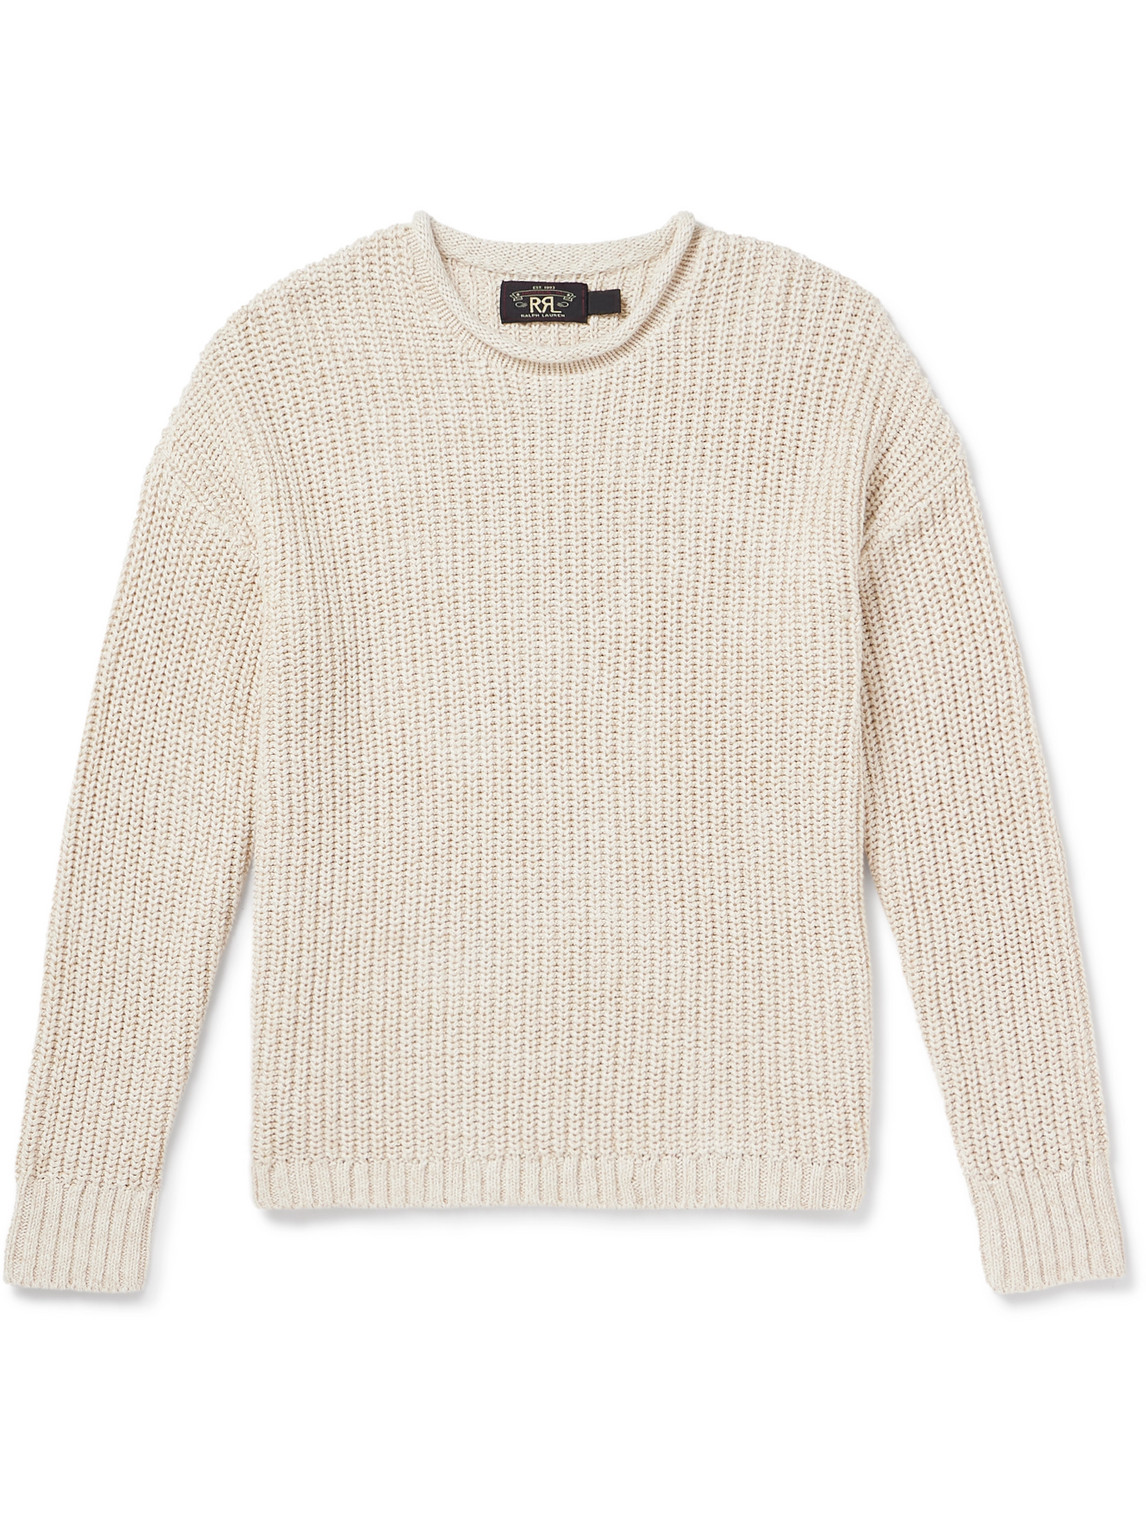 Rrl Ribbed Linen And Cotton-blend Sweater In White